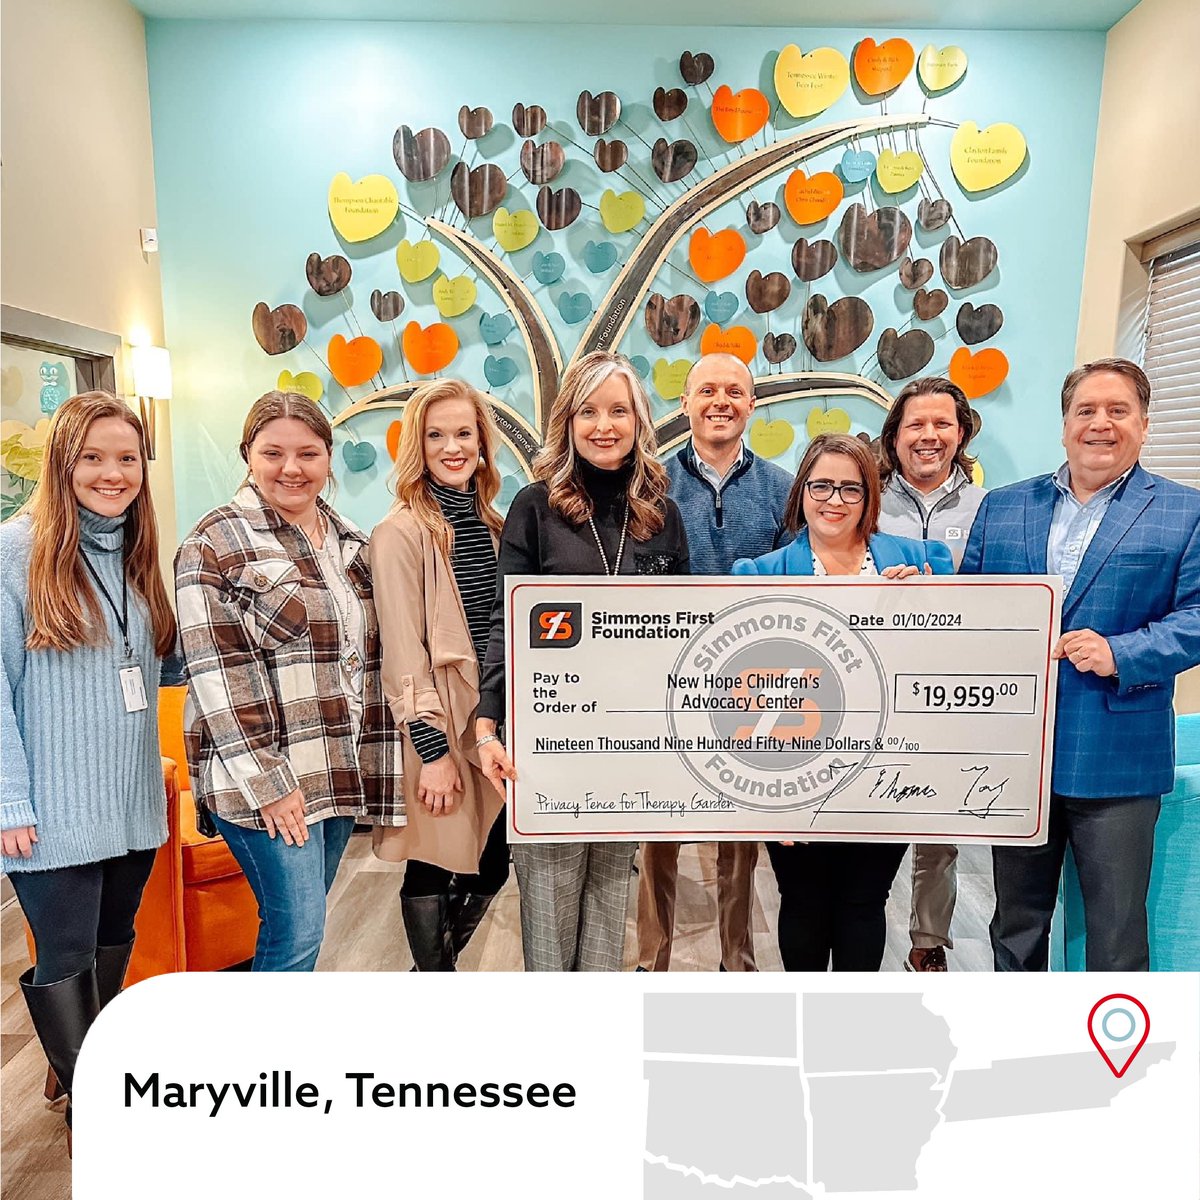 In partnership with the Simmons First Foundation, our Maryville associates donated to the New Hope Children’s Advocacy Center to fund a privacy fence for their “therapy garden.” This garden provides a restful and healing environment for counseling services. #simmonsbank